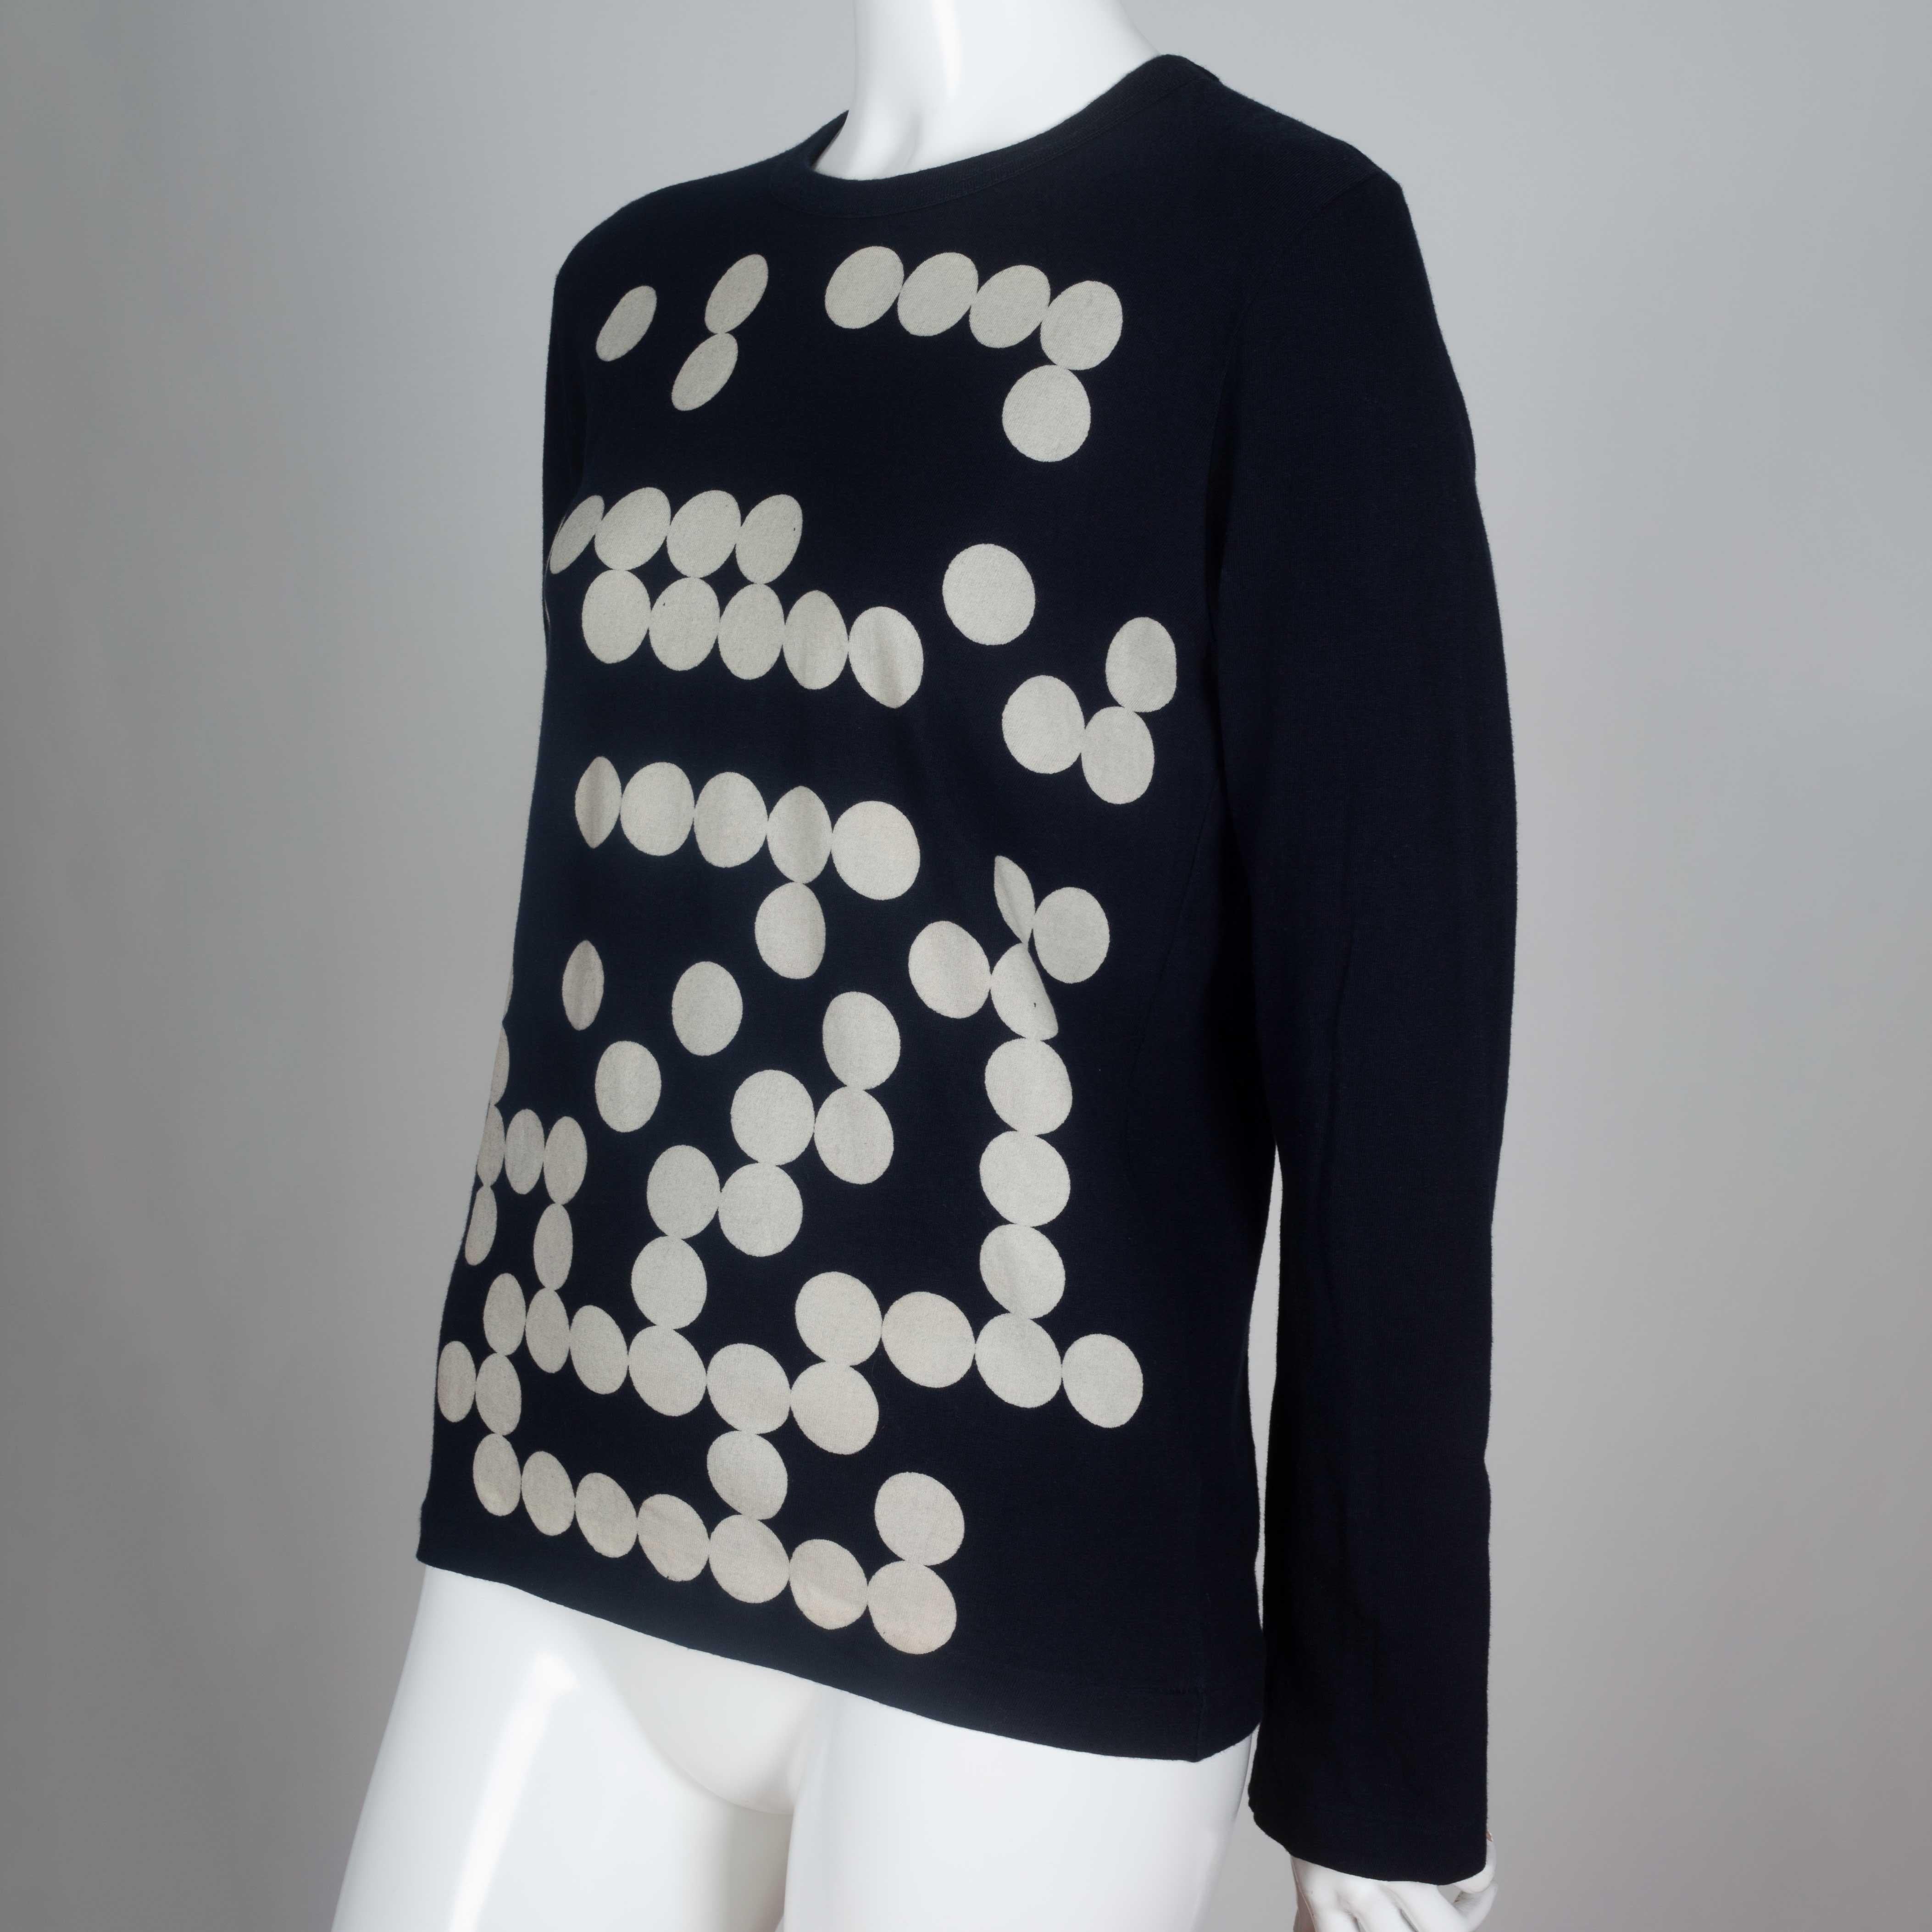 Comme des Garçons 2009 black, long sleeve t-shirt from Japan with a design of off-white dots that recall the game of Go. 

YEAR: 2009
MARKED SIZE: S
US WOMEN'S: S
US MEN'S: XS
FIT: Regular 
CHEST: 16